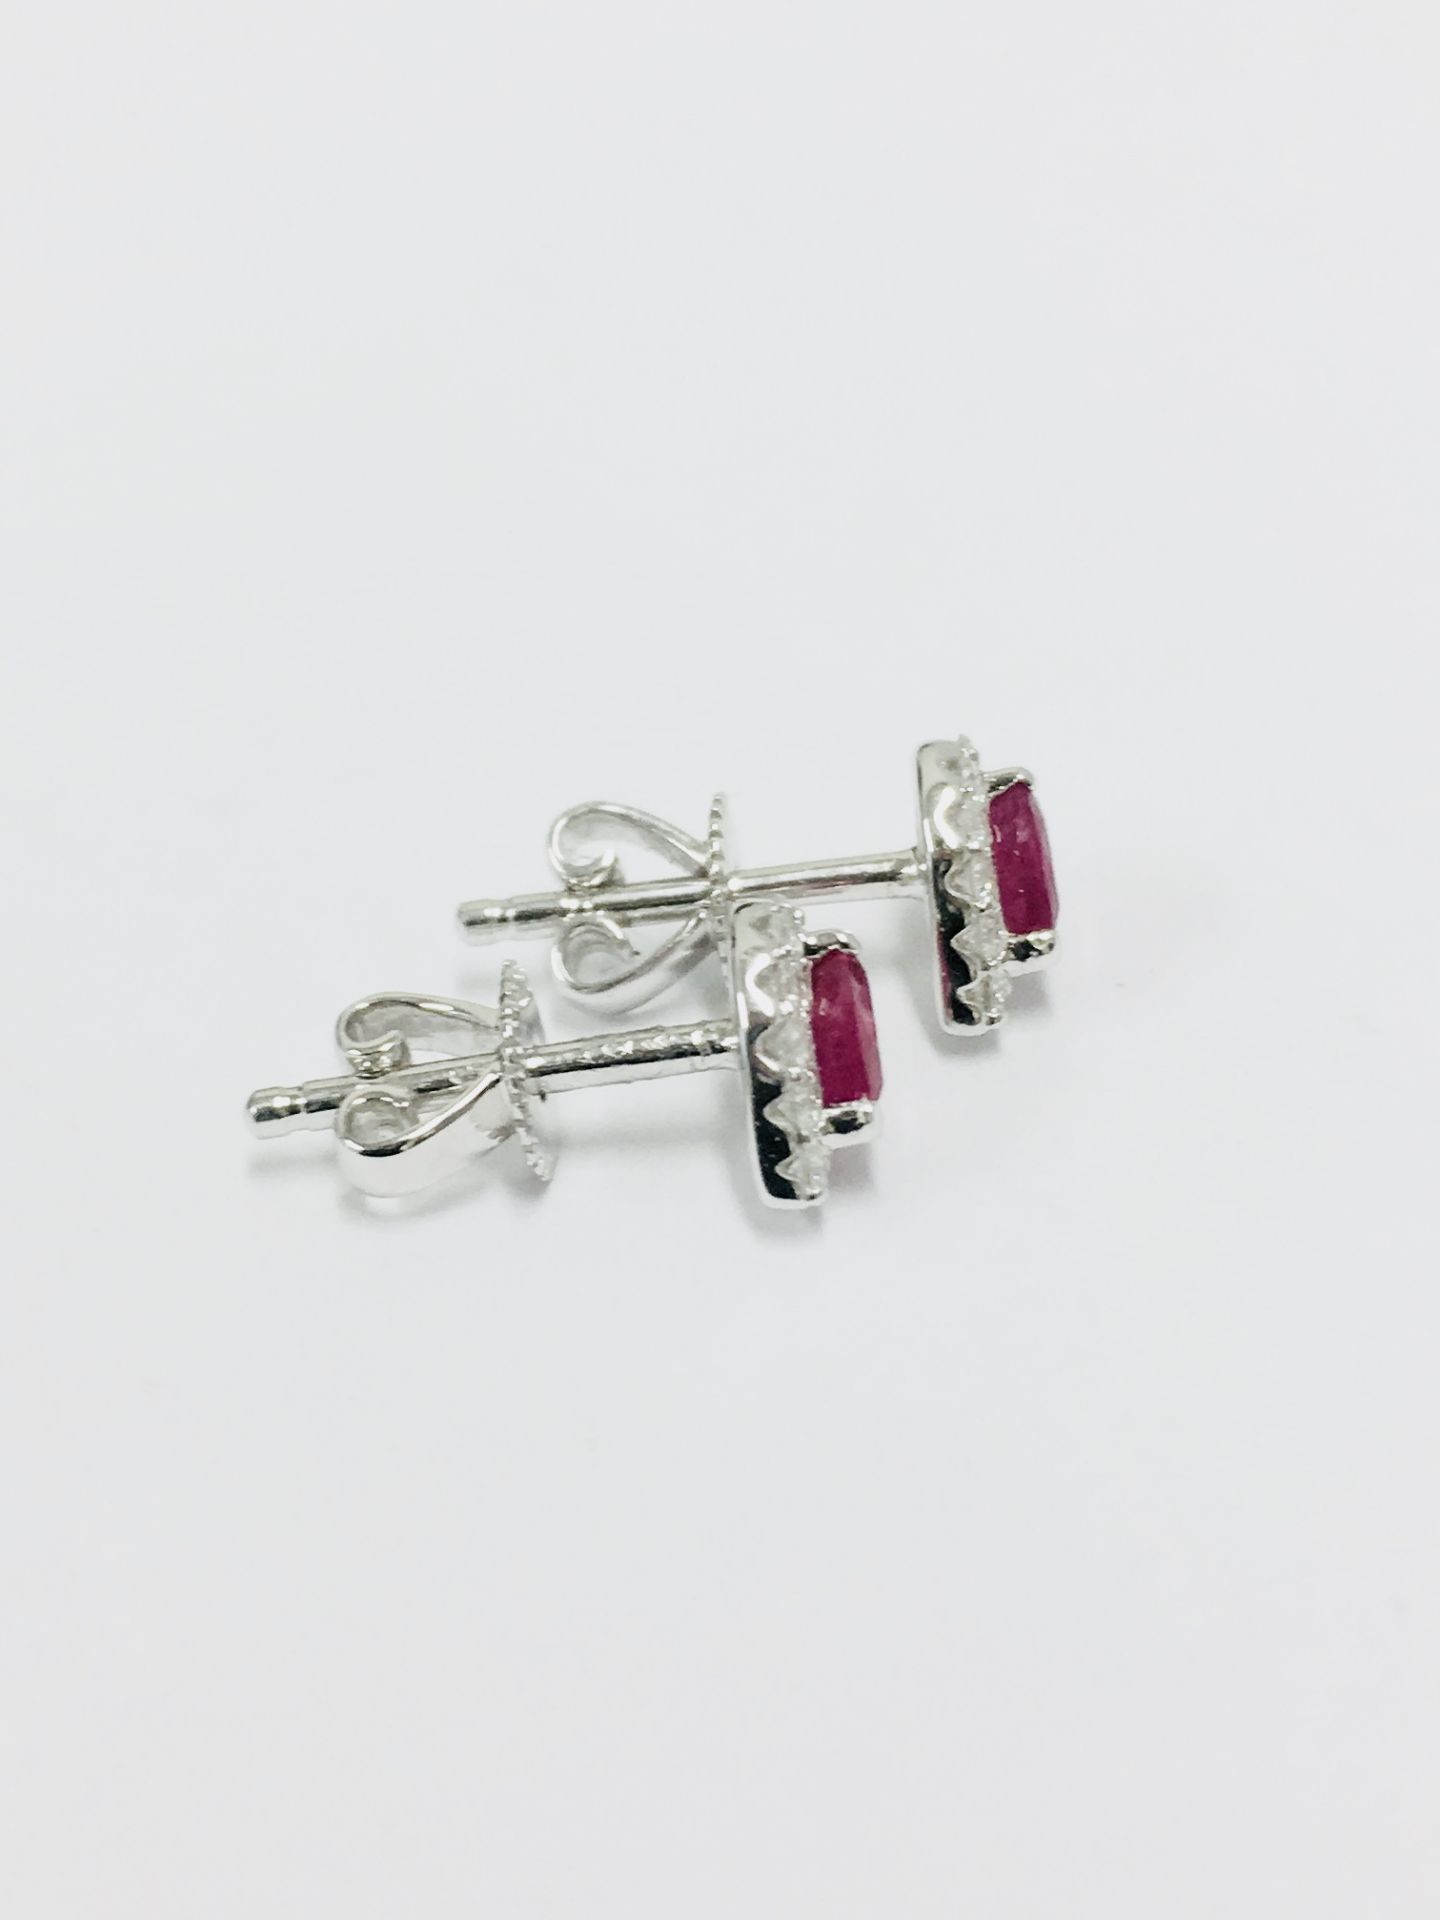 18ct white gold Ruby & Diamond Earrings,Ruby 0.58ct pearshape natural,0.17ct diamond brilliant cut g - Image 3 of 3